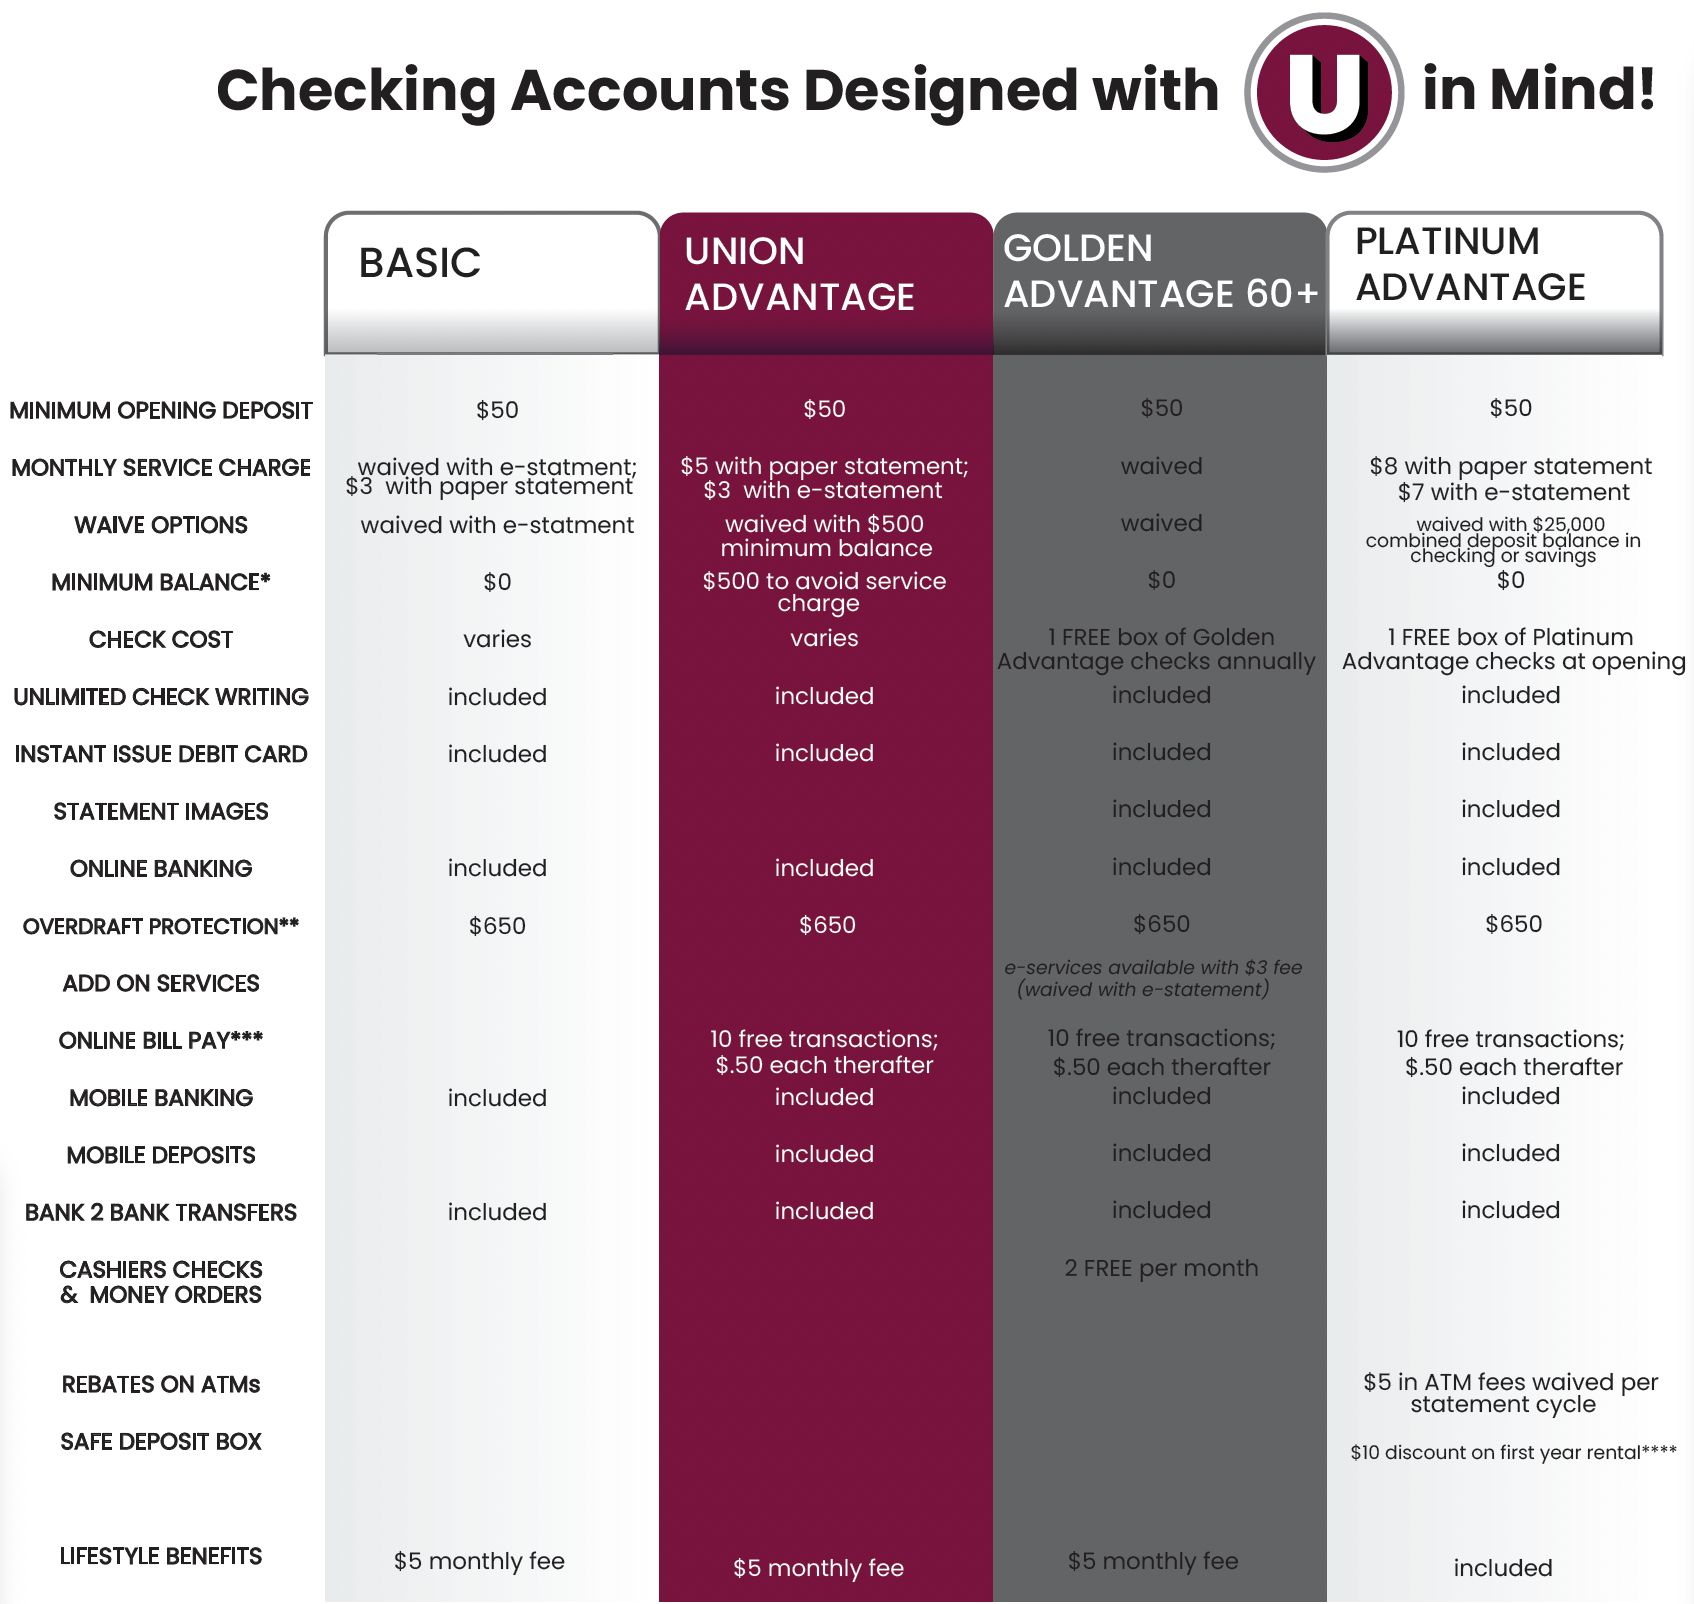 Checking Accounts Designed with U in Mind